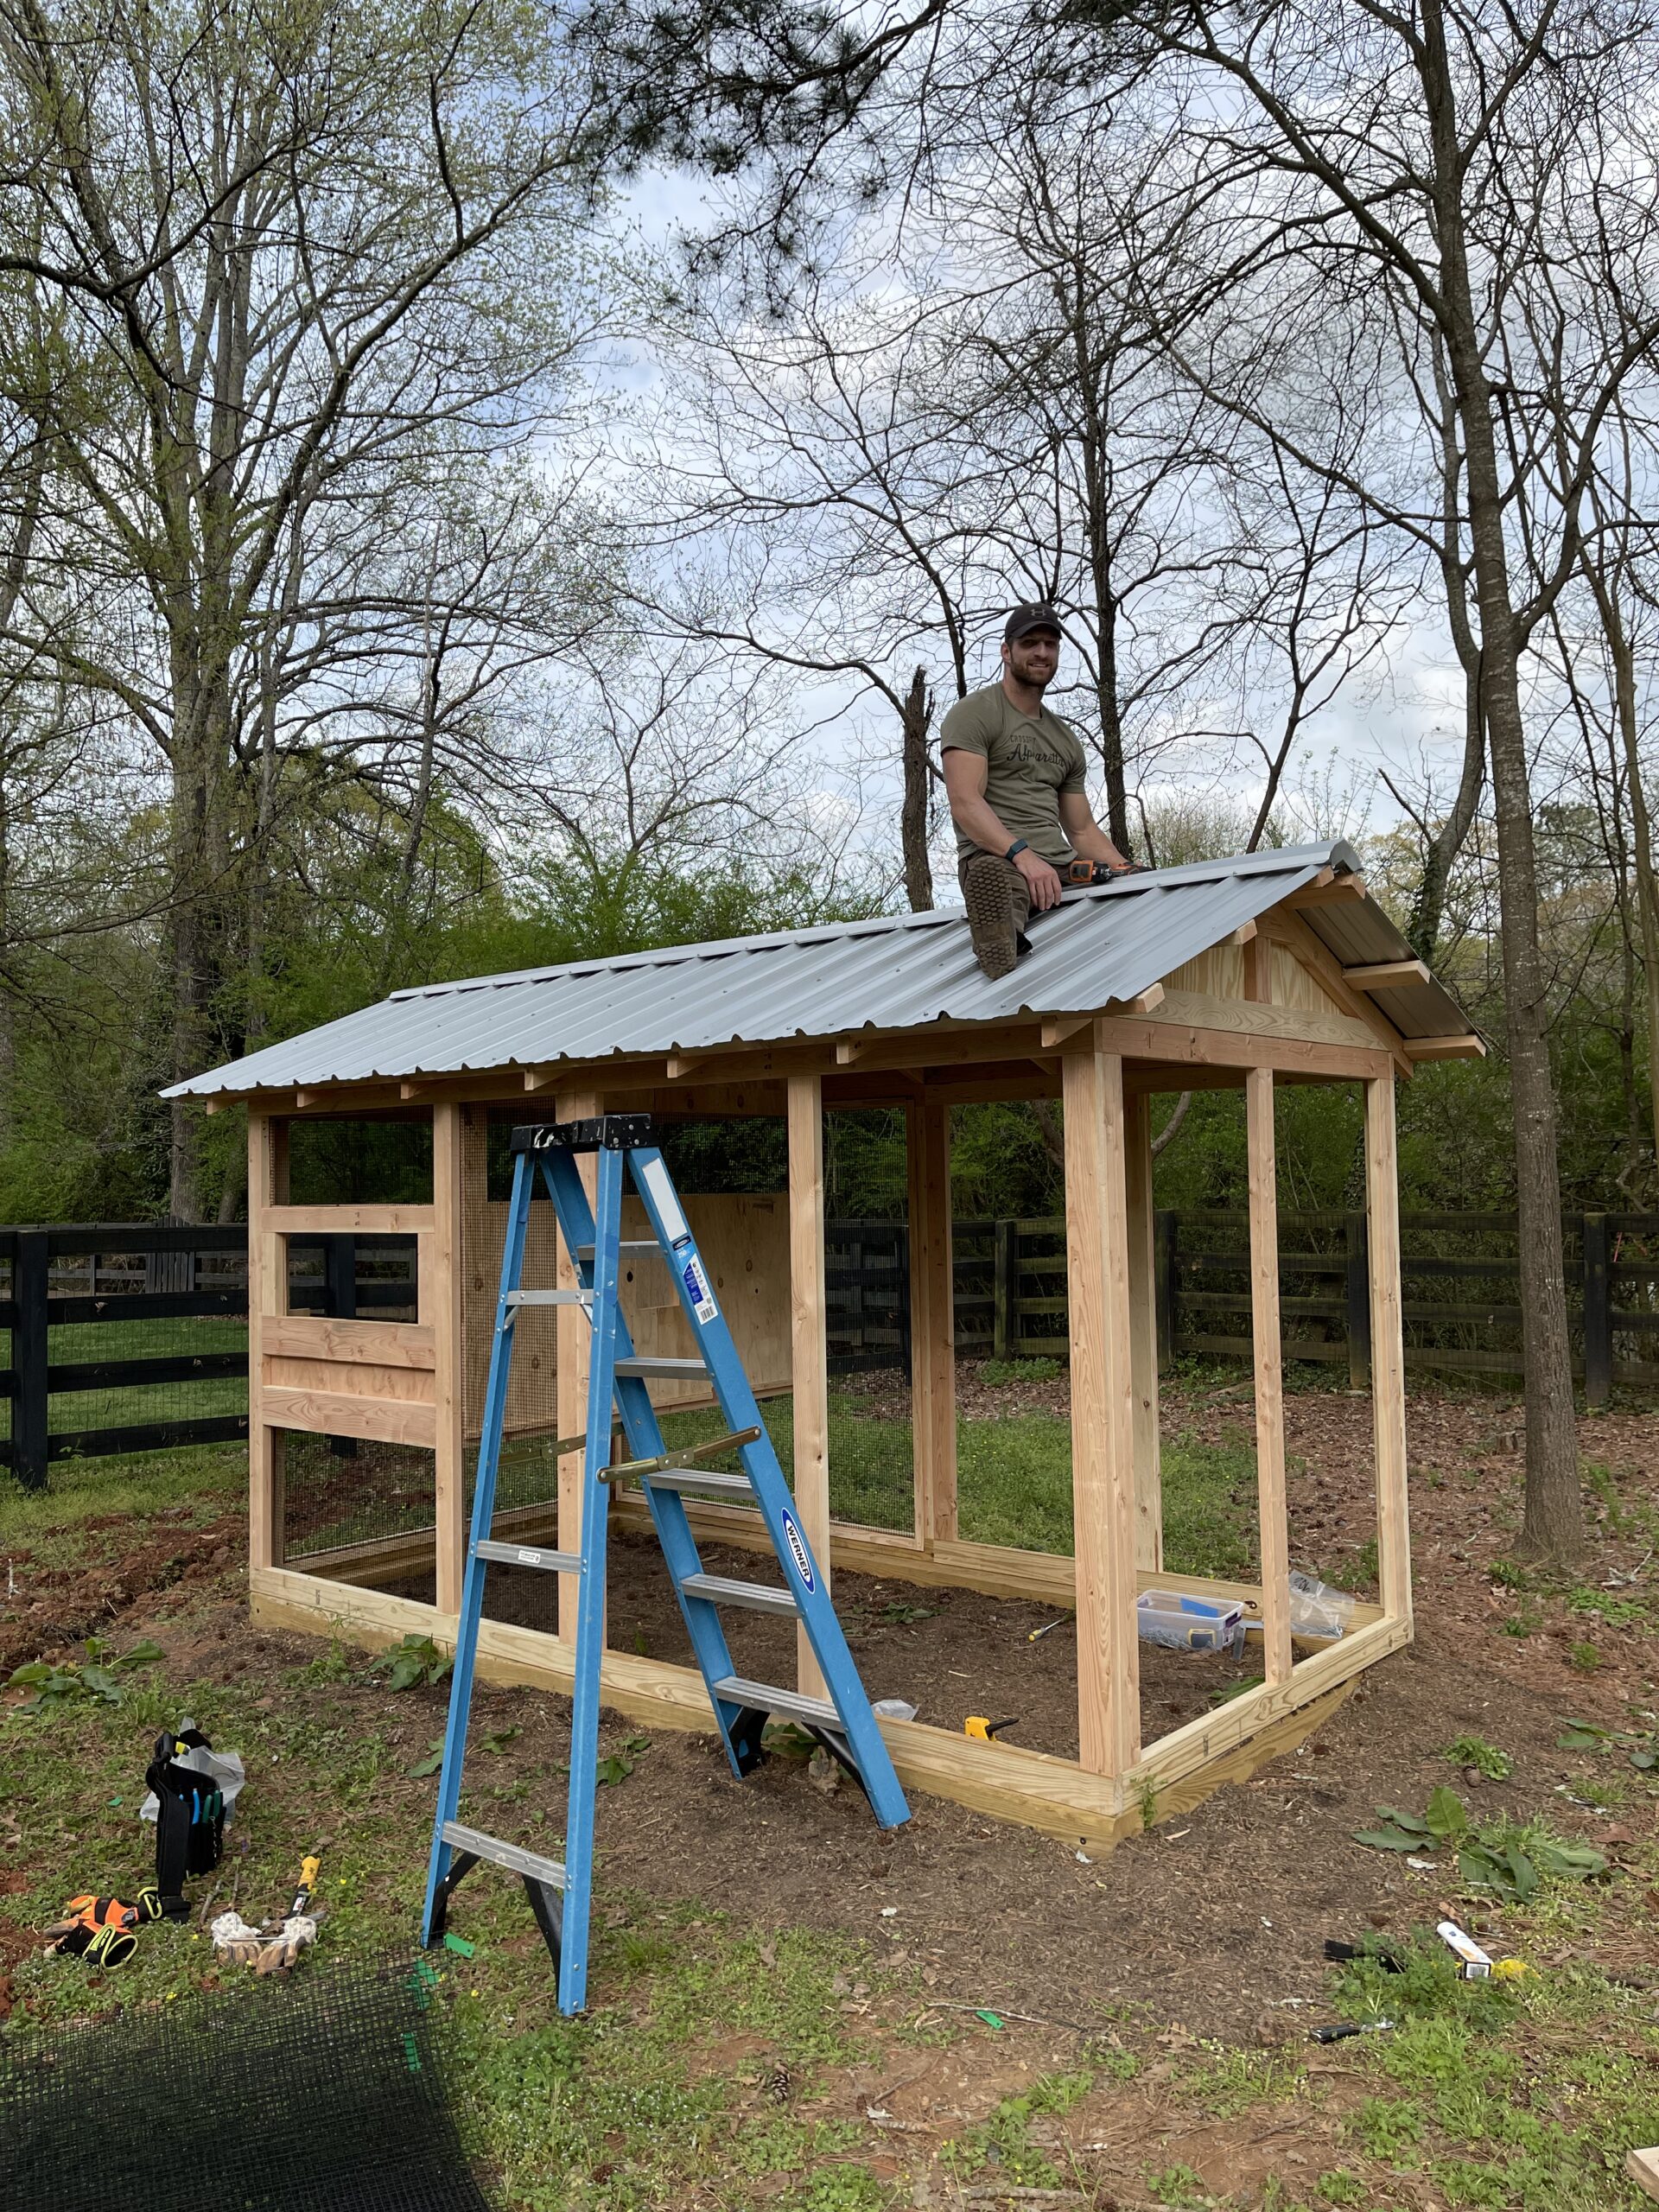 Our first coop was prefabricated so I only had to connect the walls and the roof.